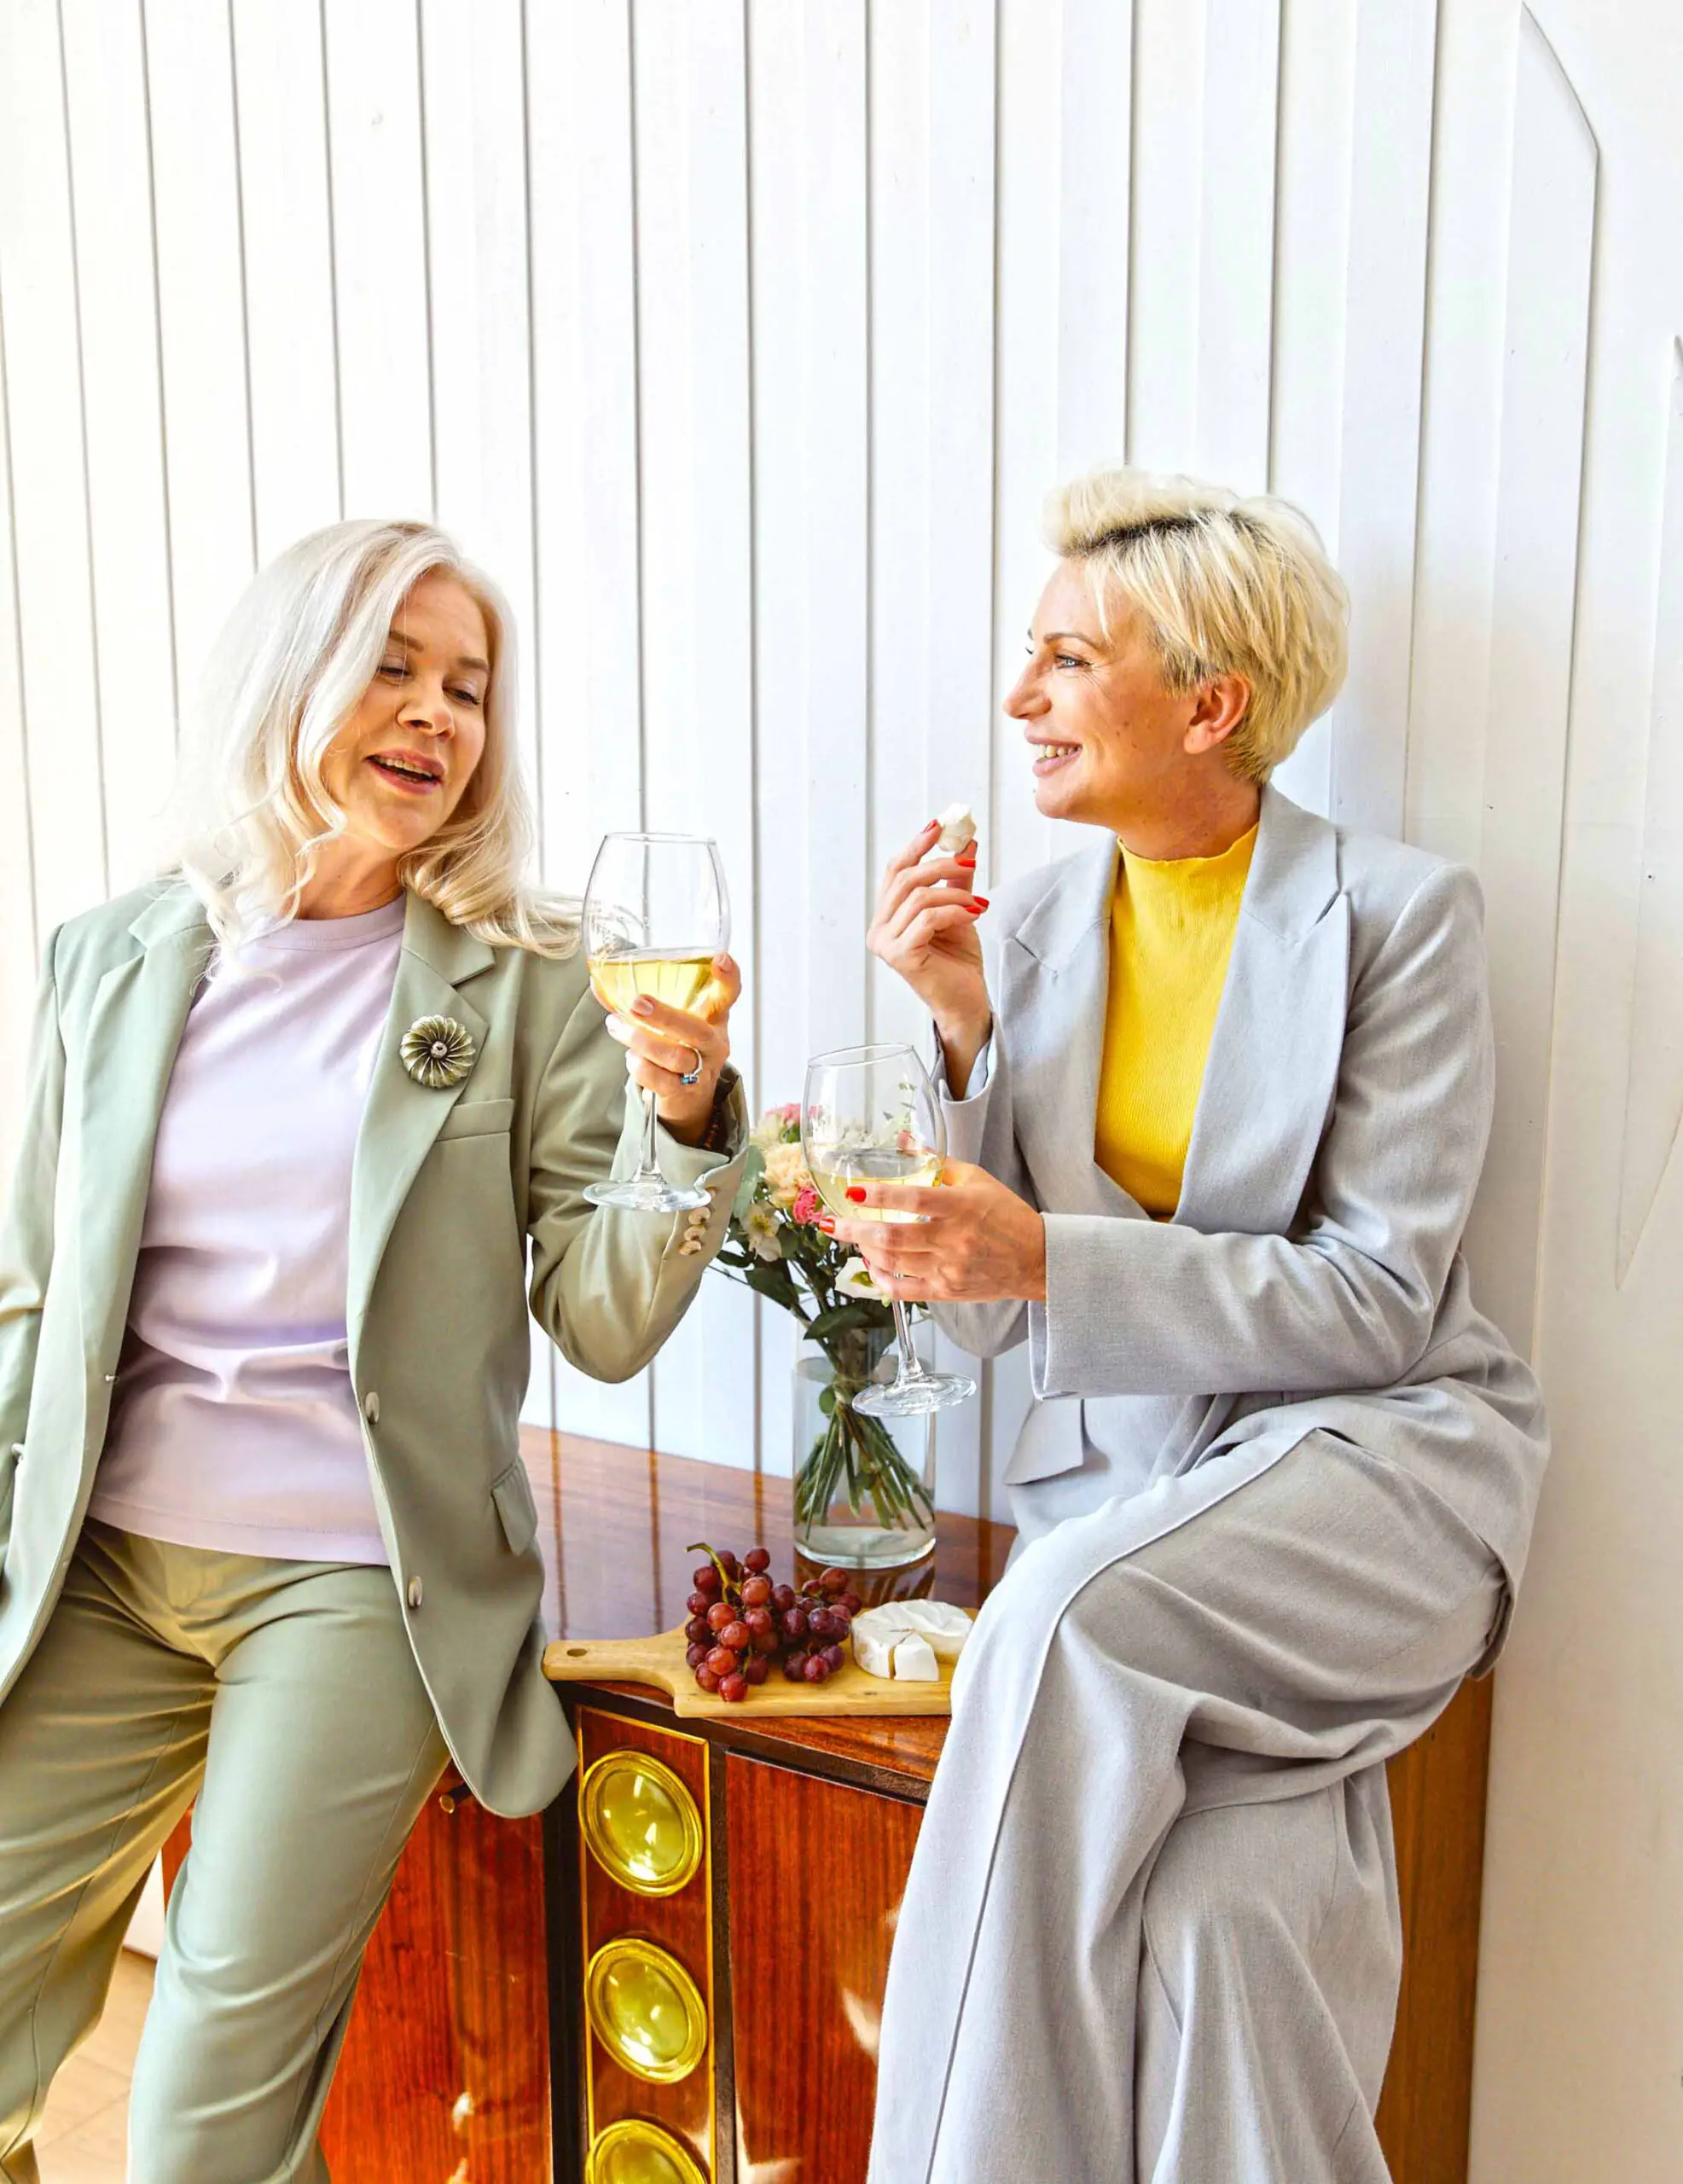 Two women drinking together